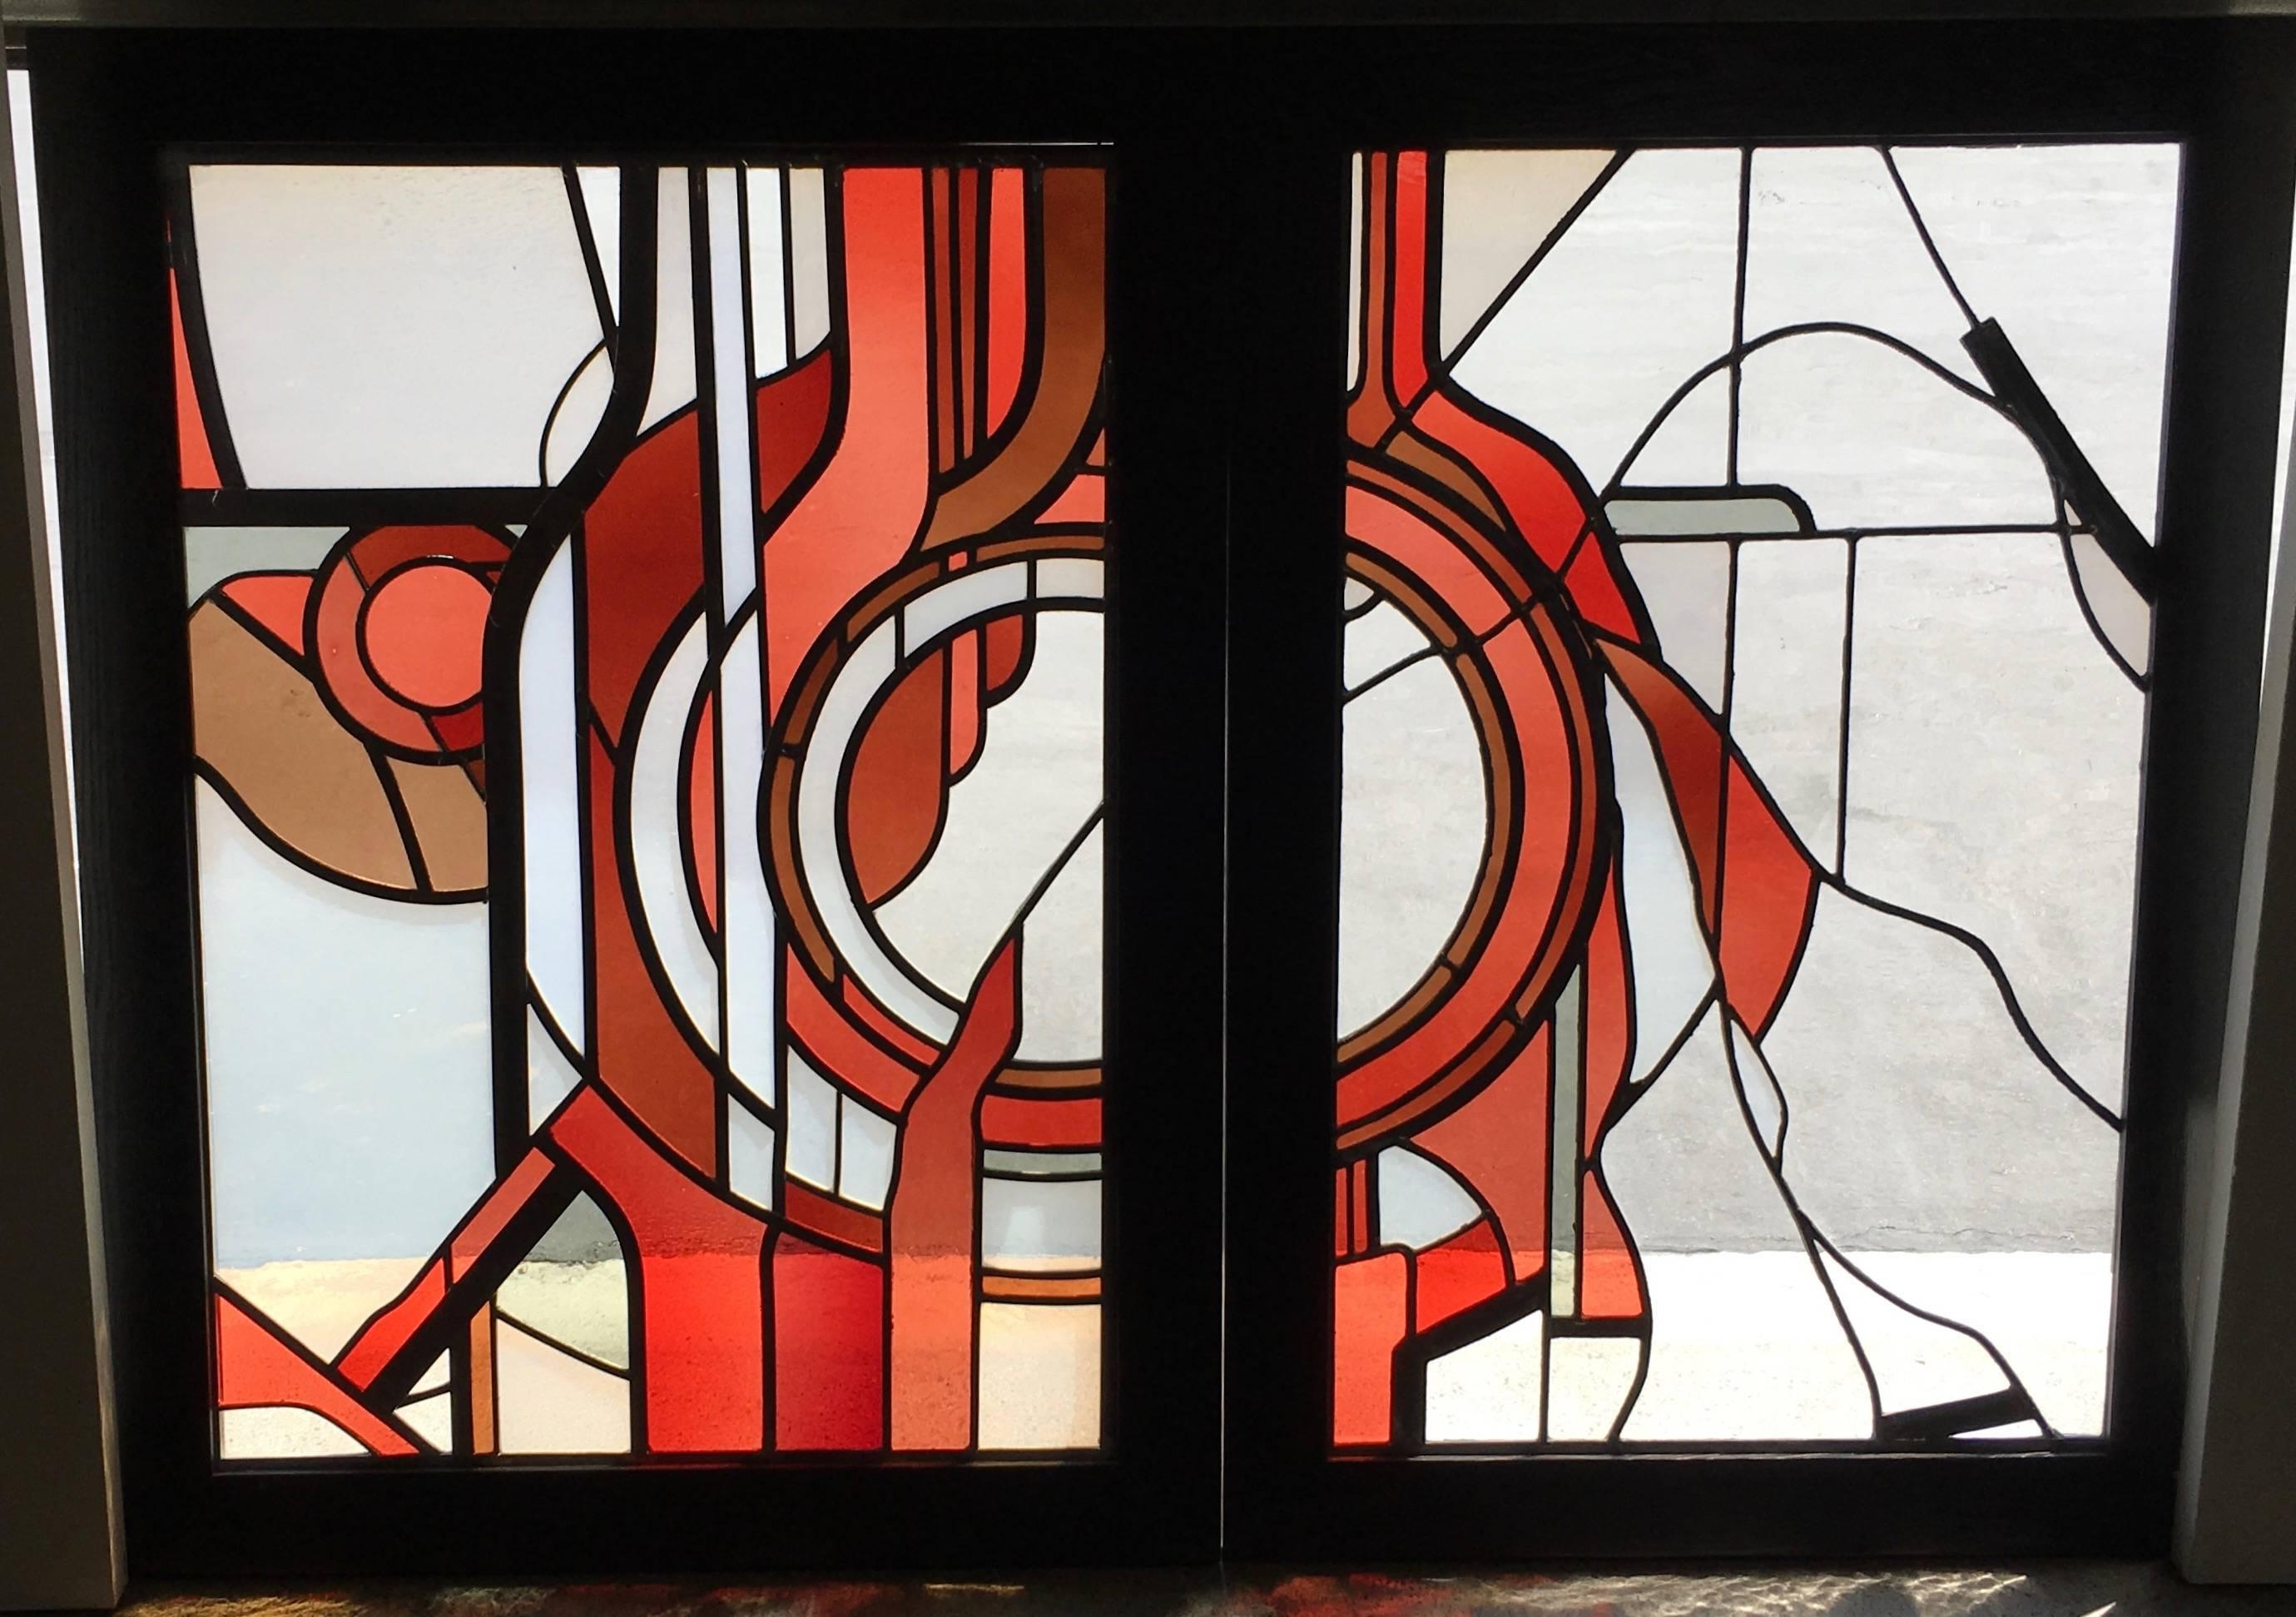 Studio crafted stained glass abstraction. These pieces have been custom framed for display.

Two panels measures: 30.5